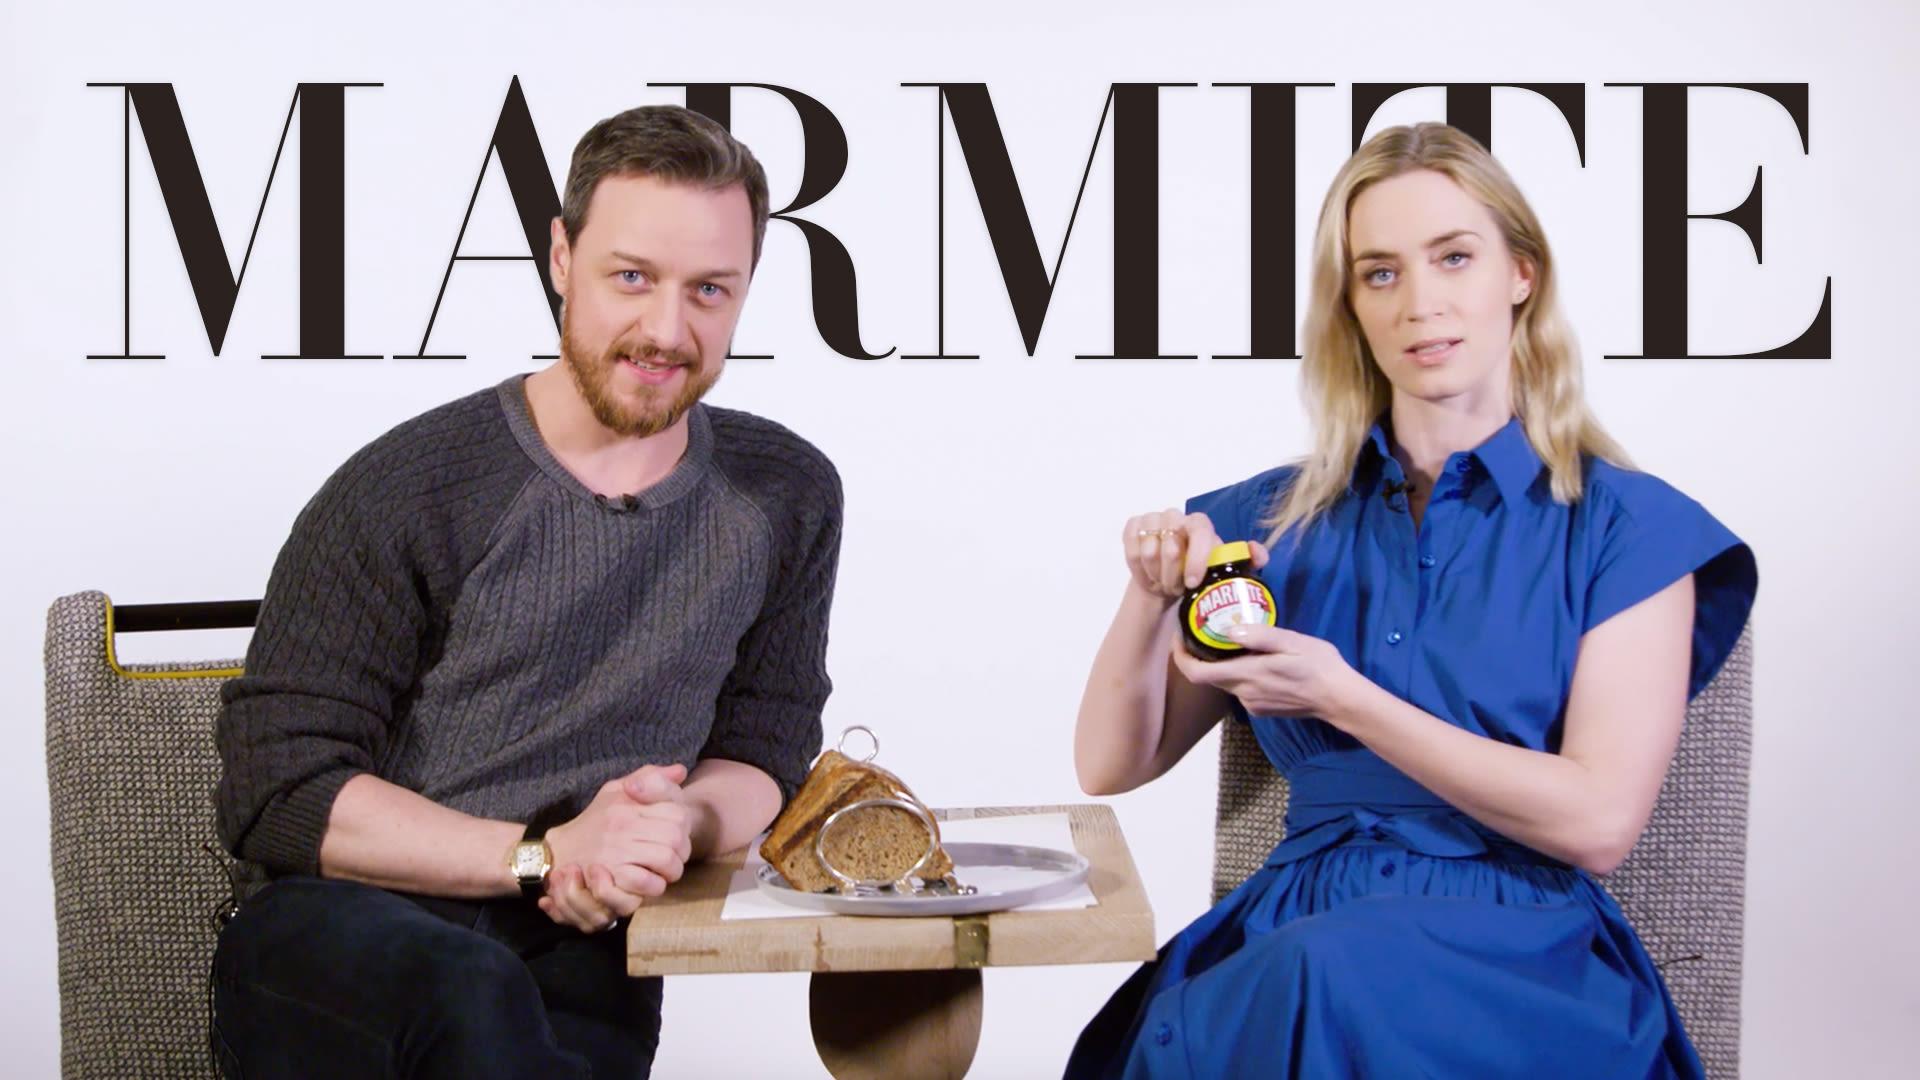 Emily Blunt and James McAvoy Explain a Typical British Day.